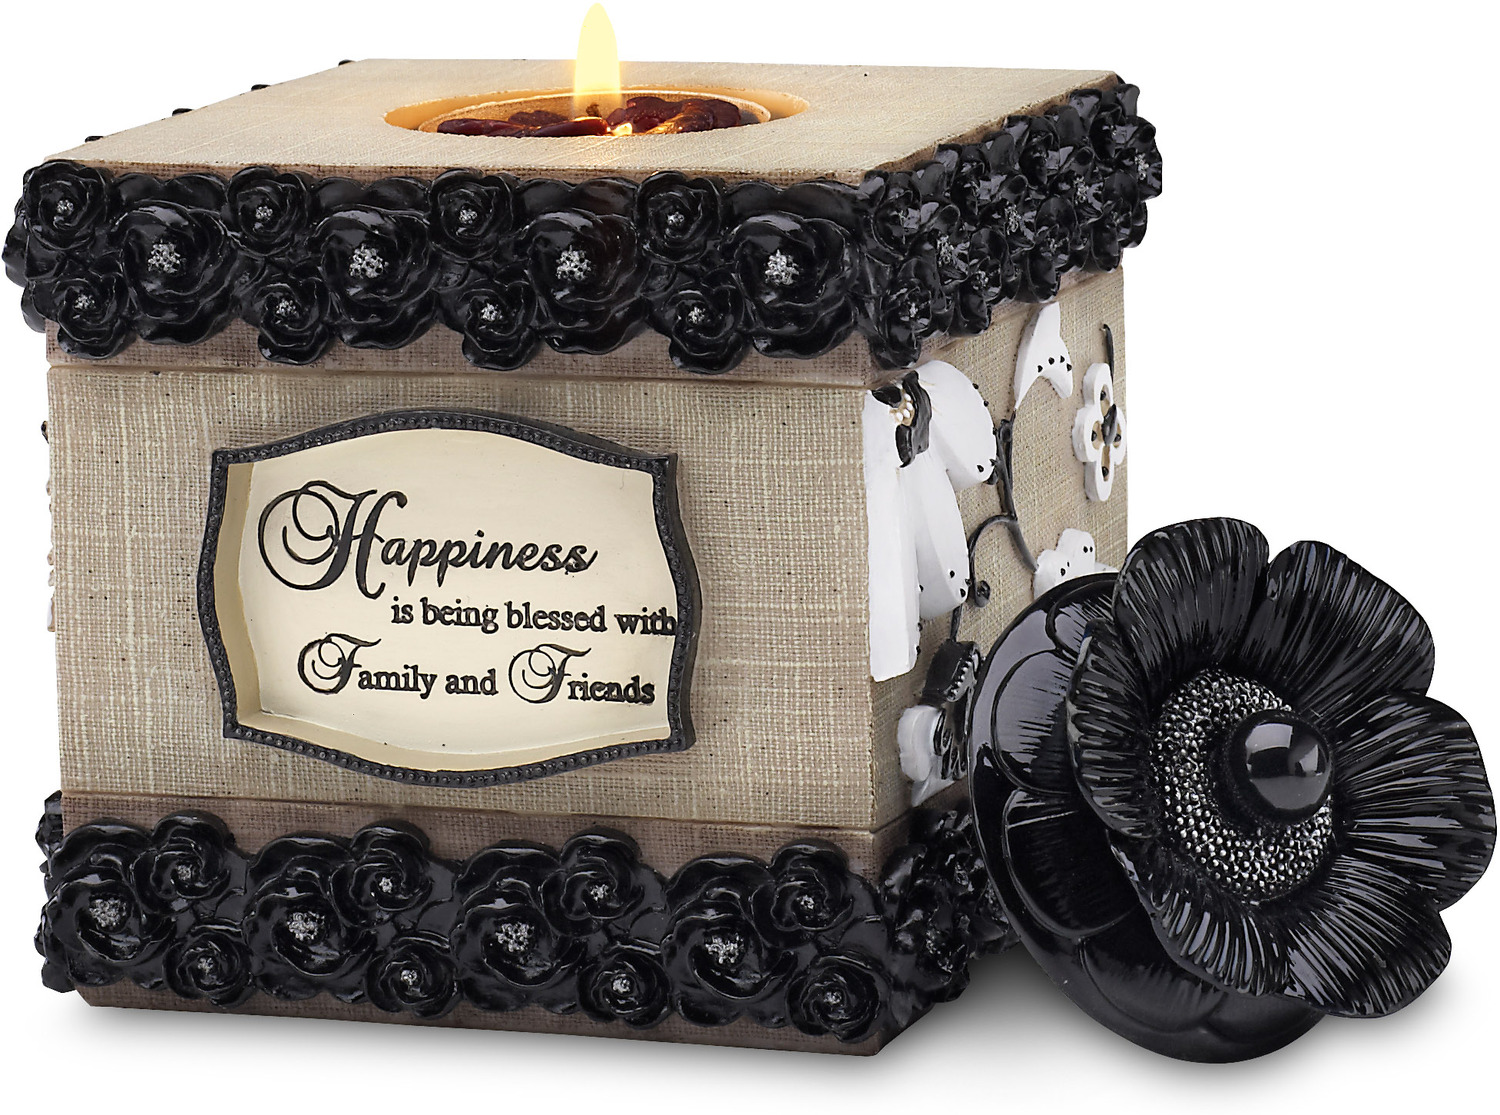 Happiness by Modeles - Happiness - 4.5" Square Tea Light Holder